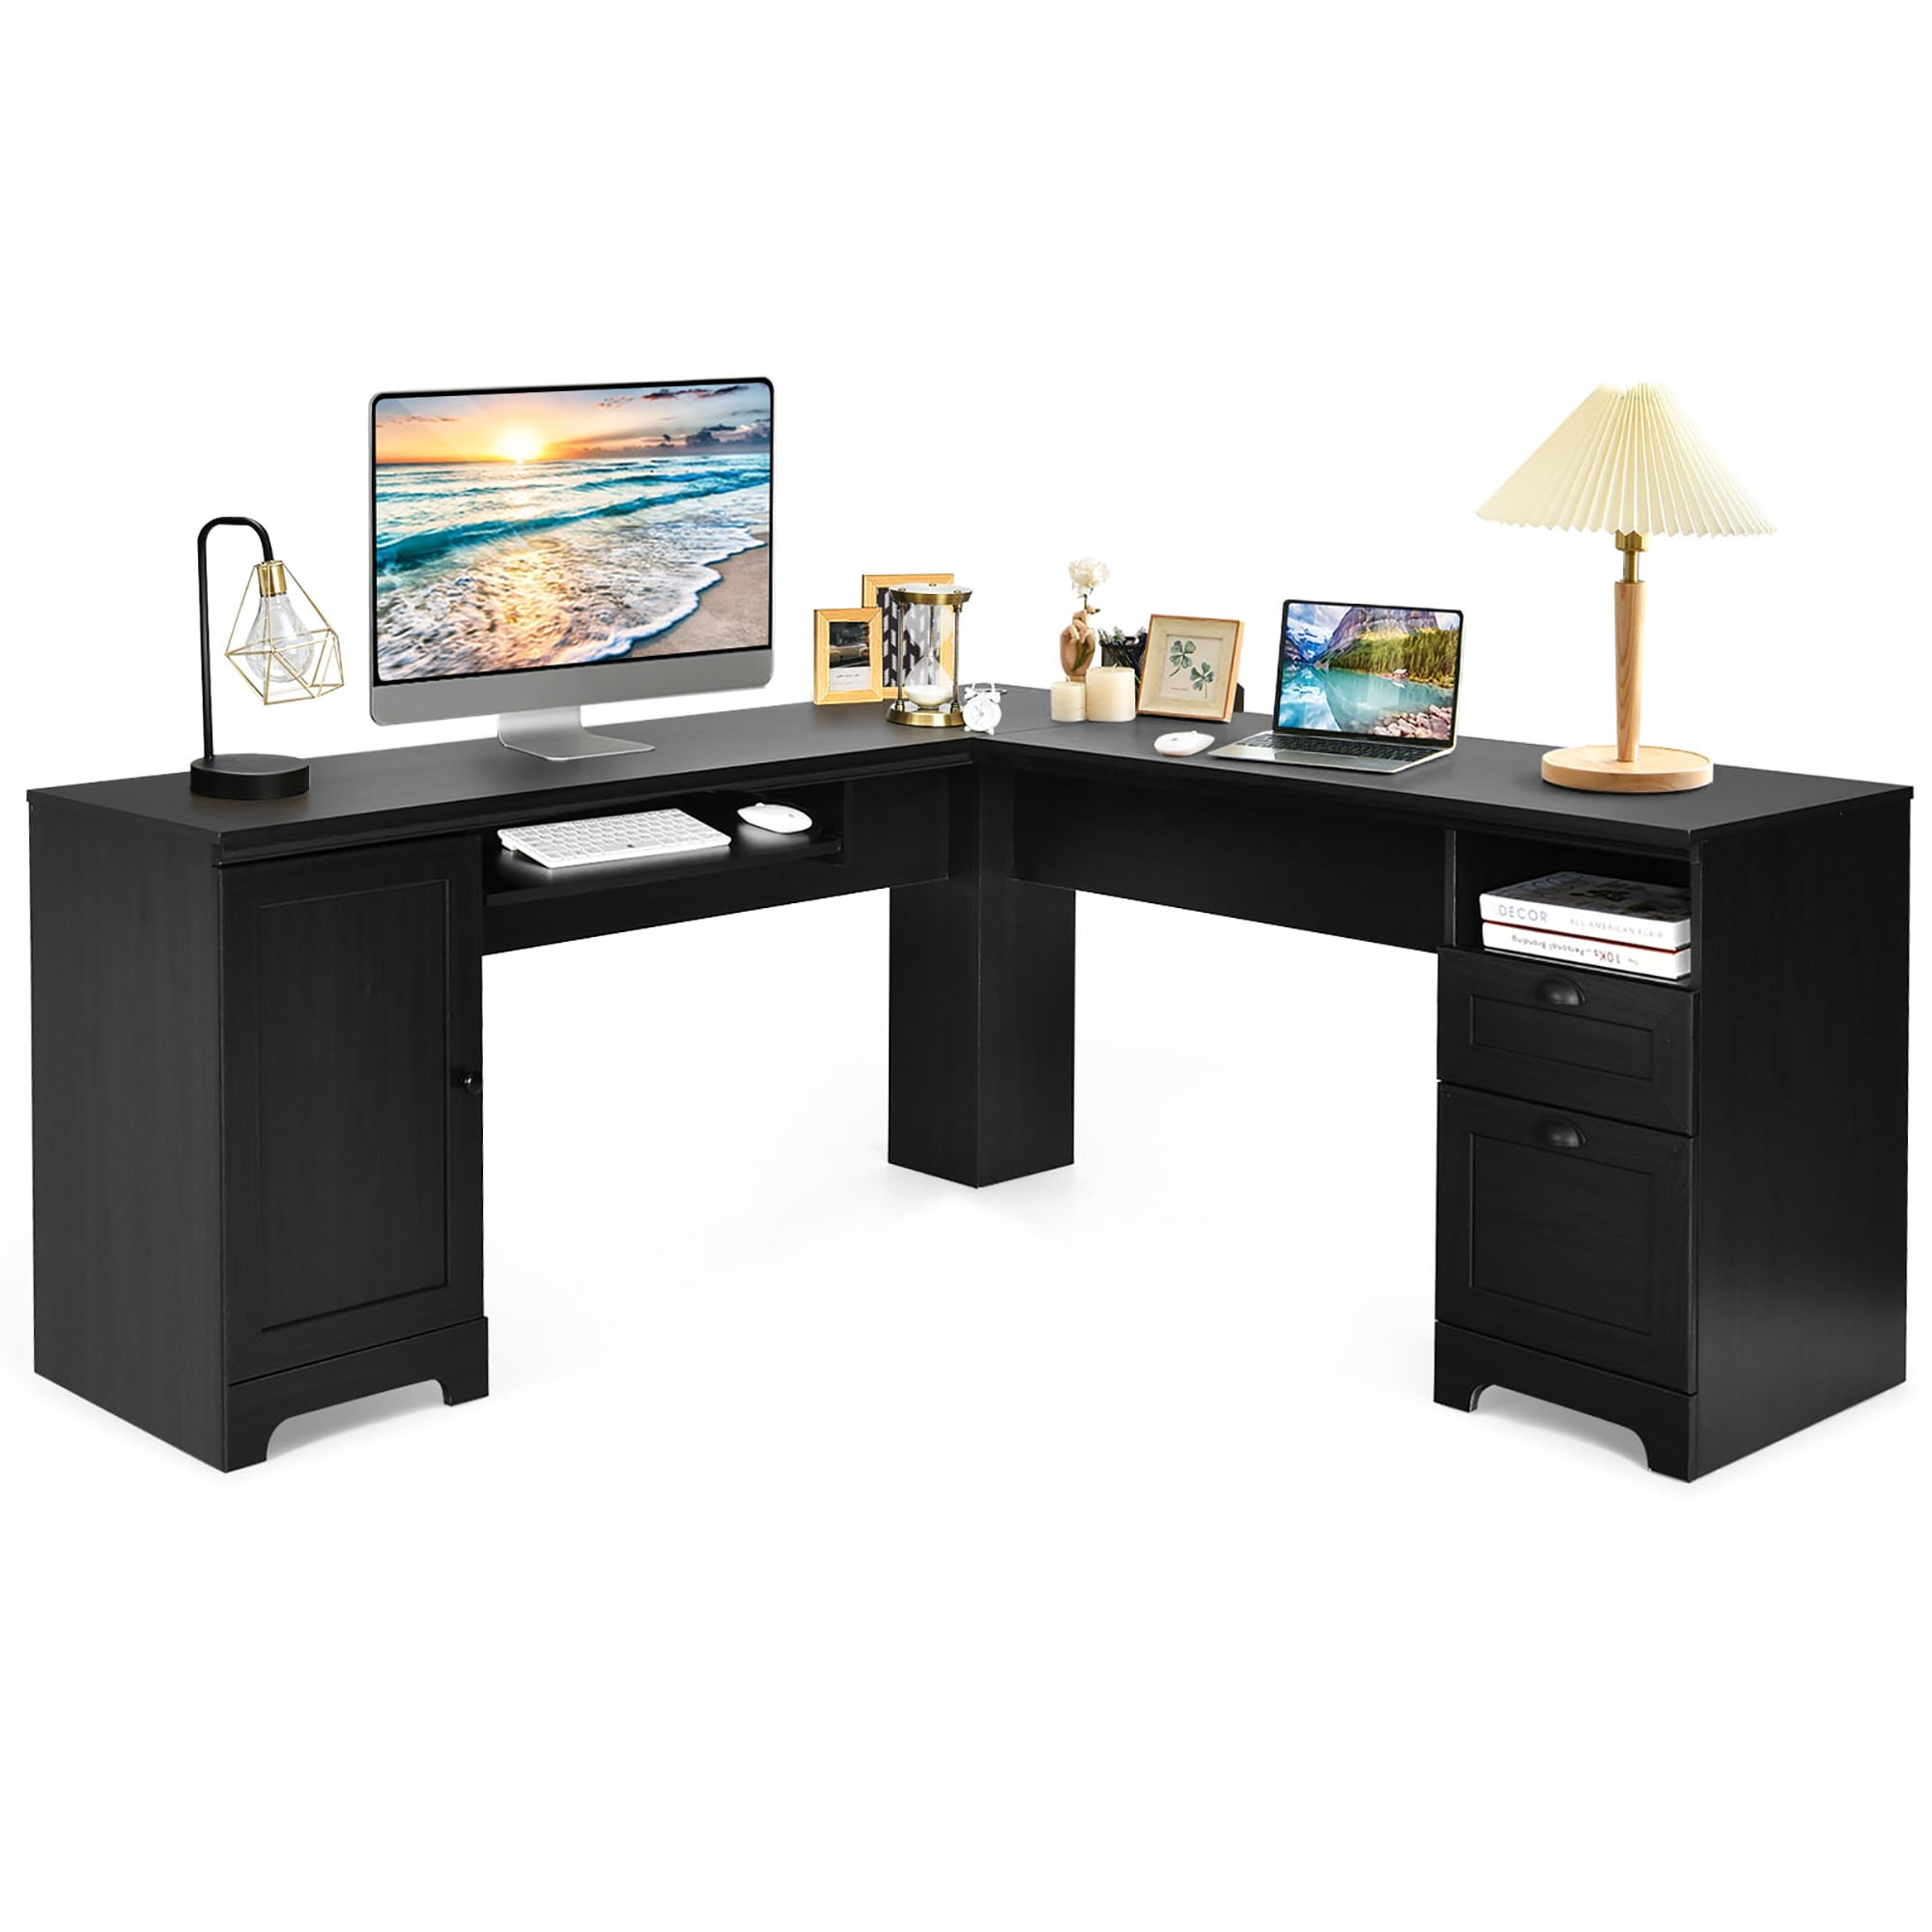 Wooden Corner Desk With Drawer Computer PC Table Study Office Room Black 